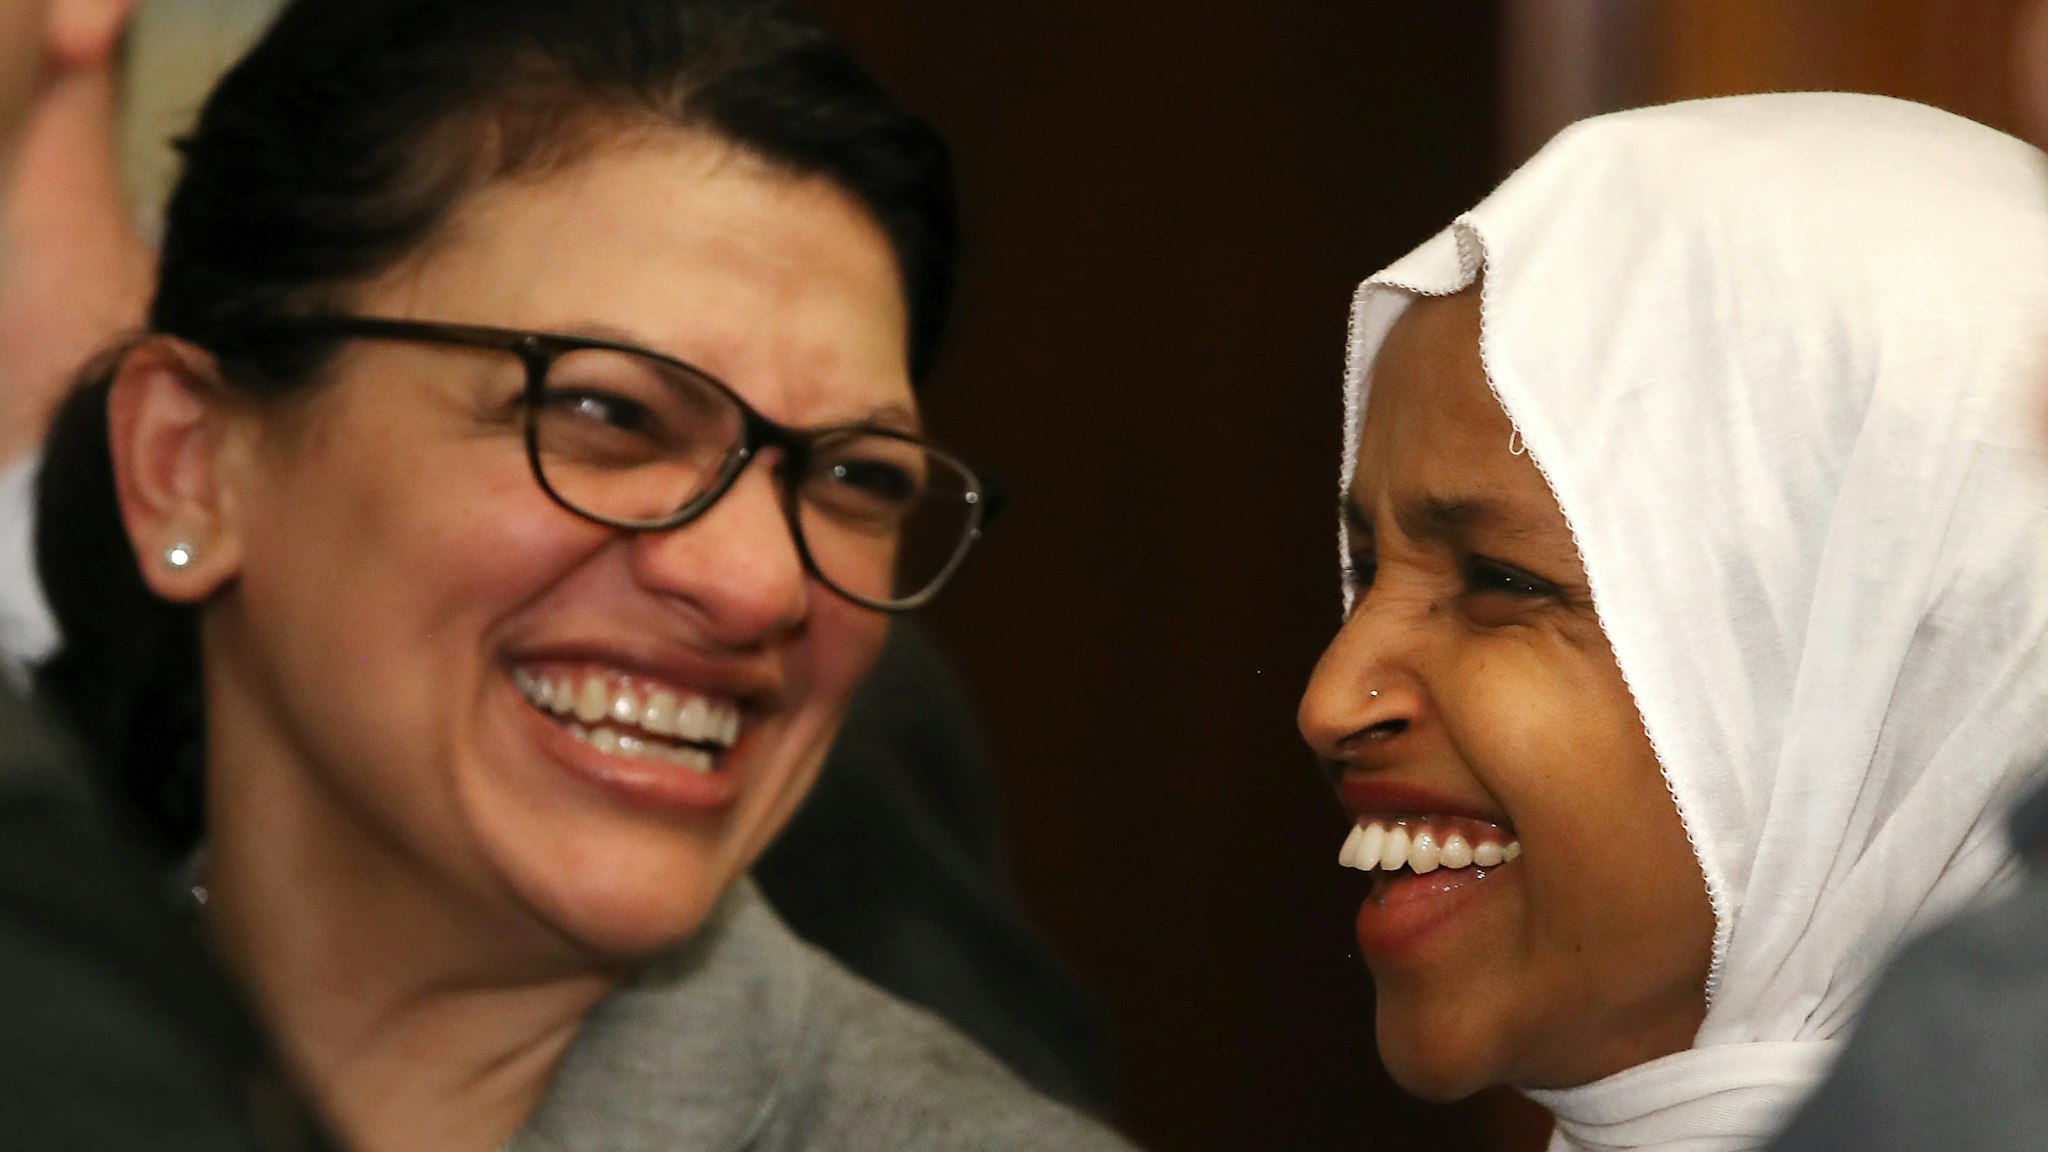 Rep. Ilhan Omar (D-MN) (R) and Rep. Rashida Tlaib (D-MN) attend a news conference where House and Senate Democrats introduced the Equality Act of 2019 which would ban discrimination against lesbian, gay, bisexual and transgender people, on March 13, 2019 in Washington, DC.